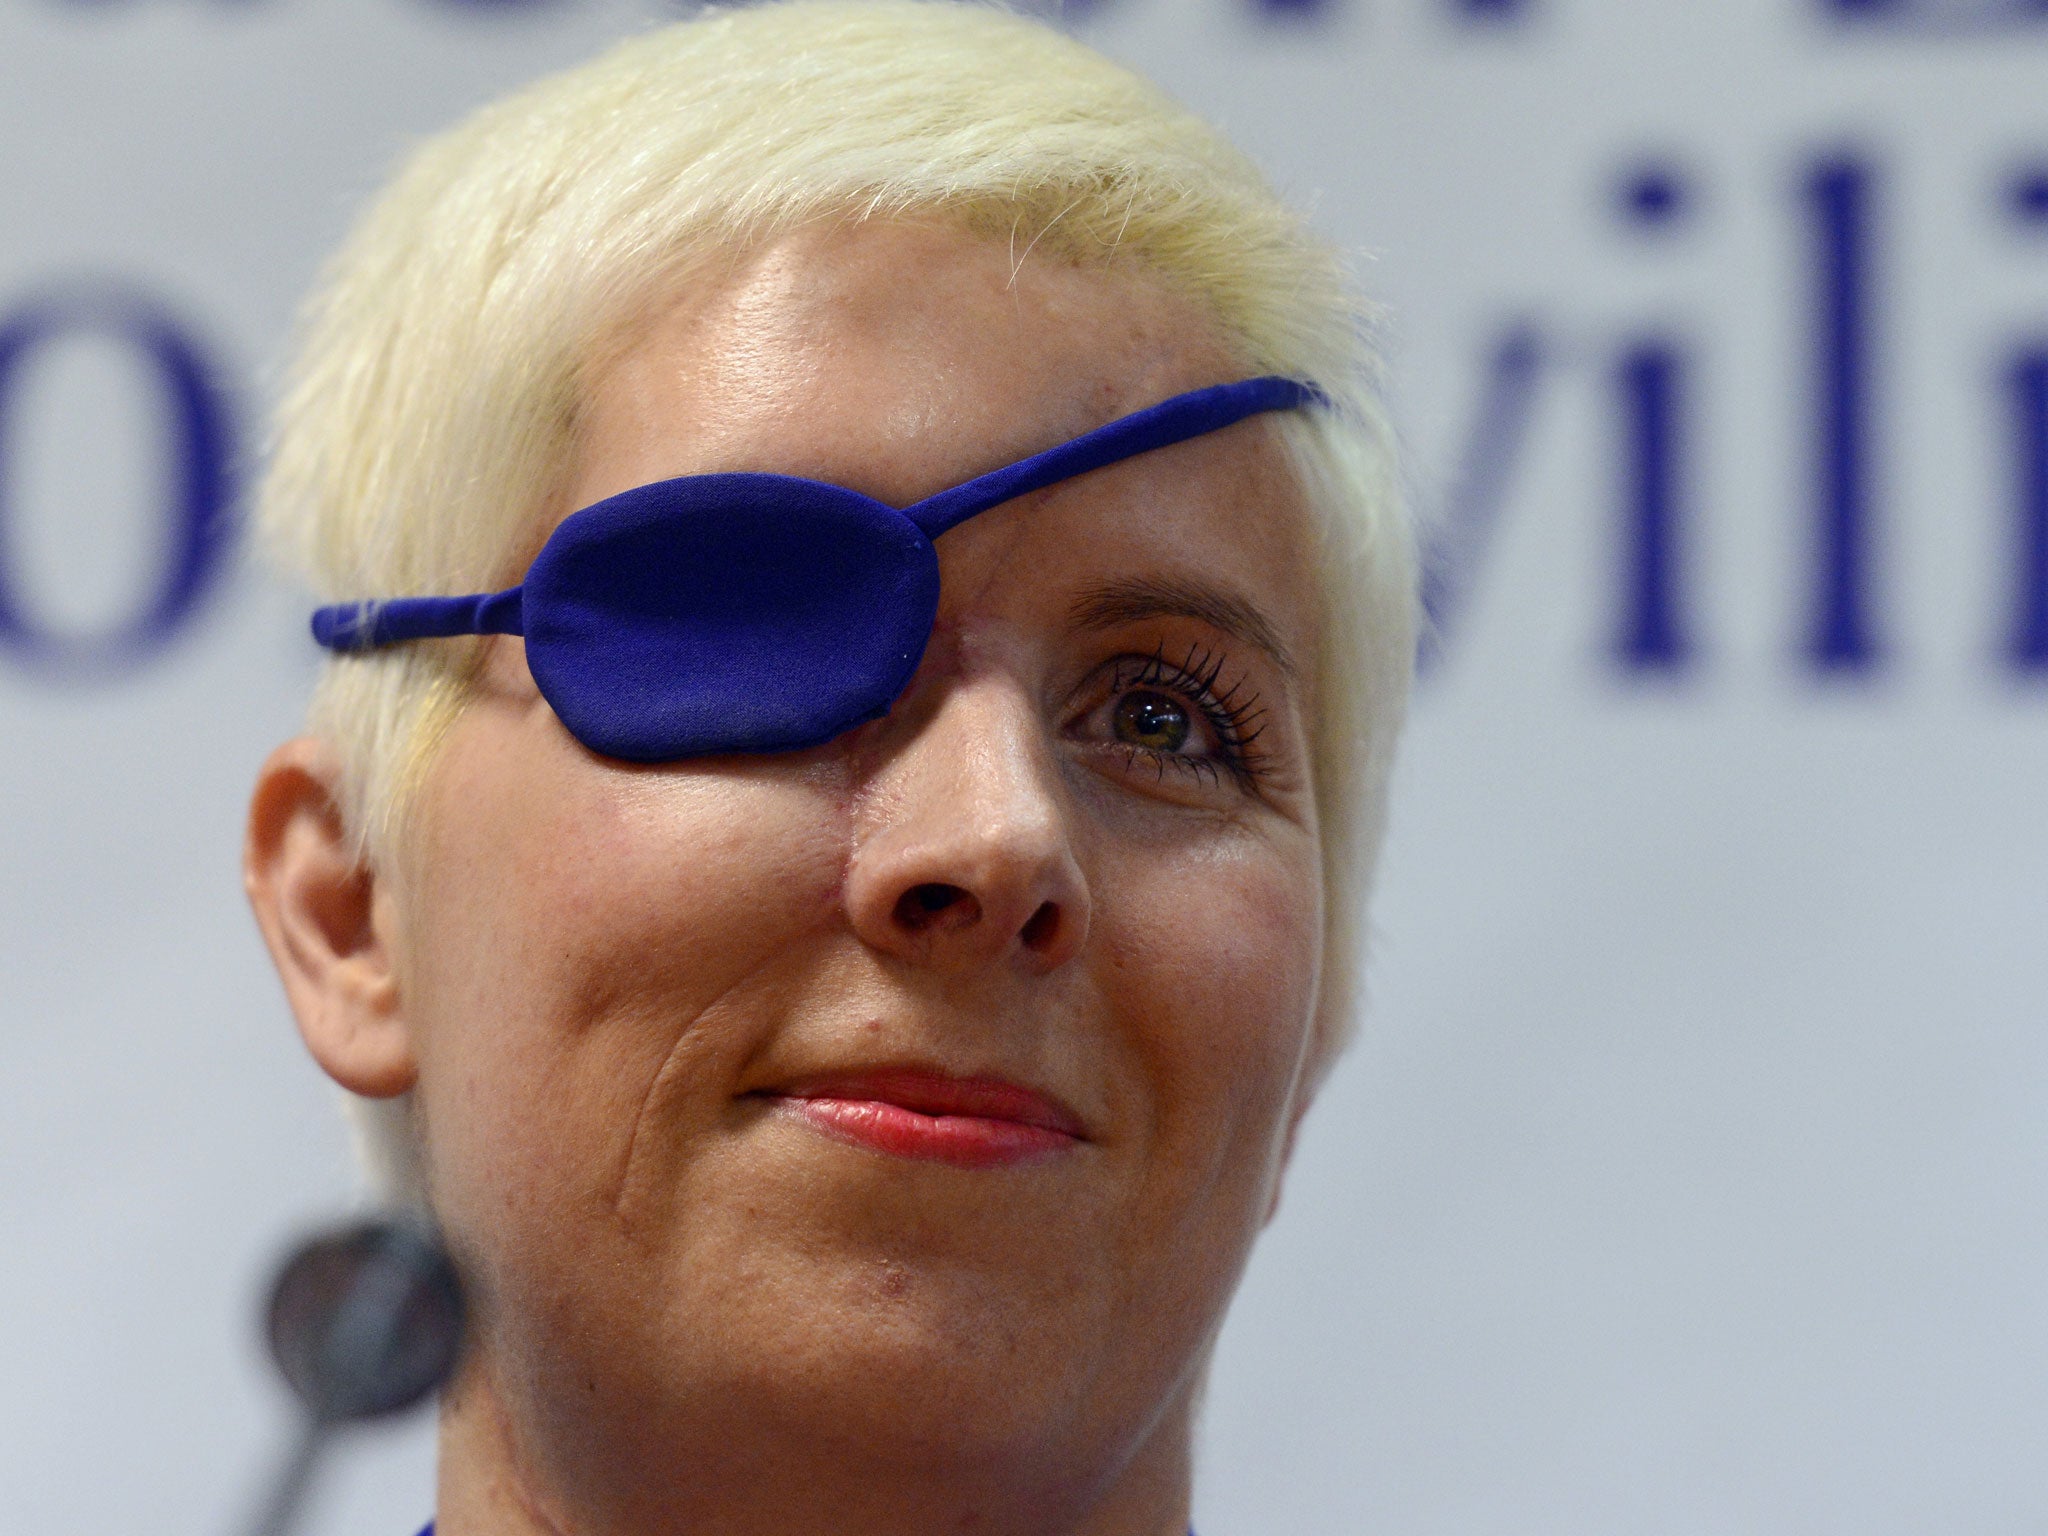 Maria de Villota passed away aged 33 just a year after being involved in a horrific crash where she lost her right eye